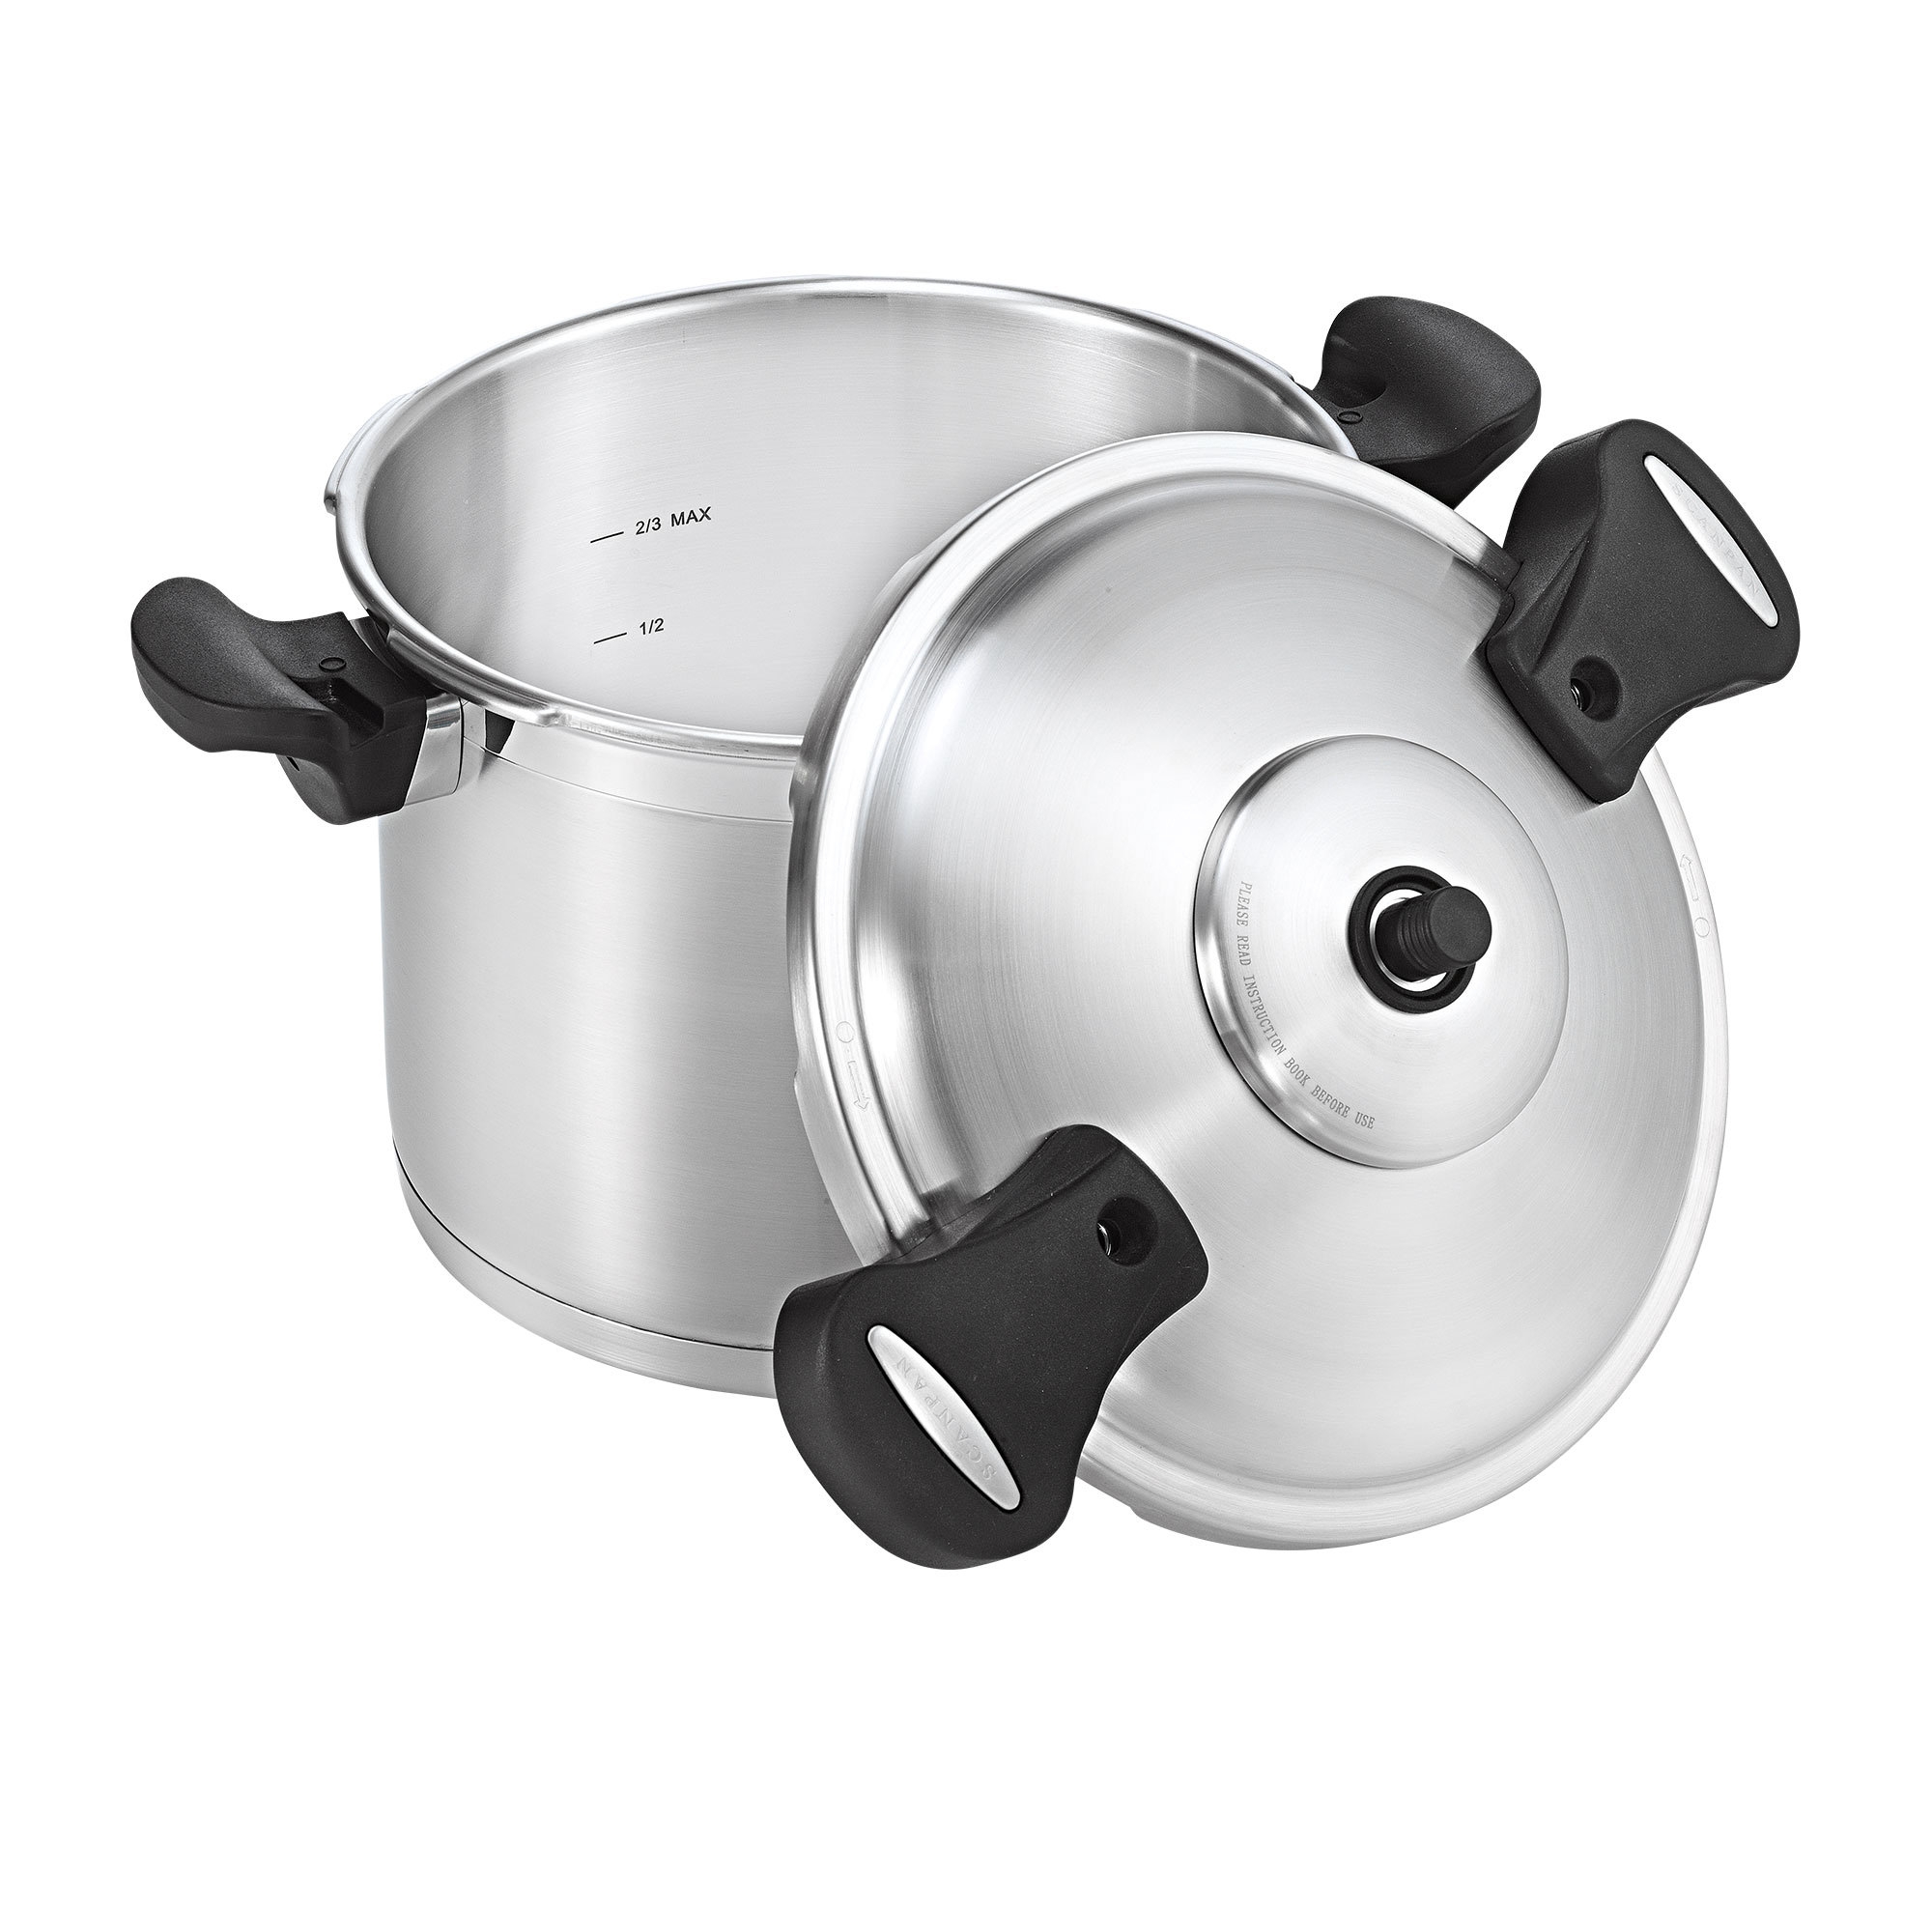 Scanpan Stainless Steel Pressure Cooker 24cm - 8L Image 1